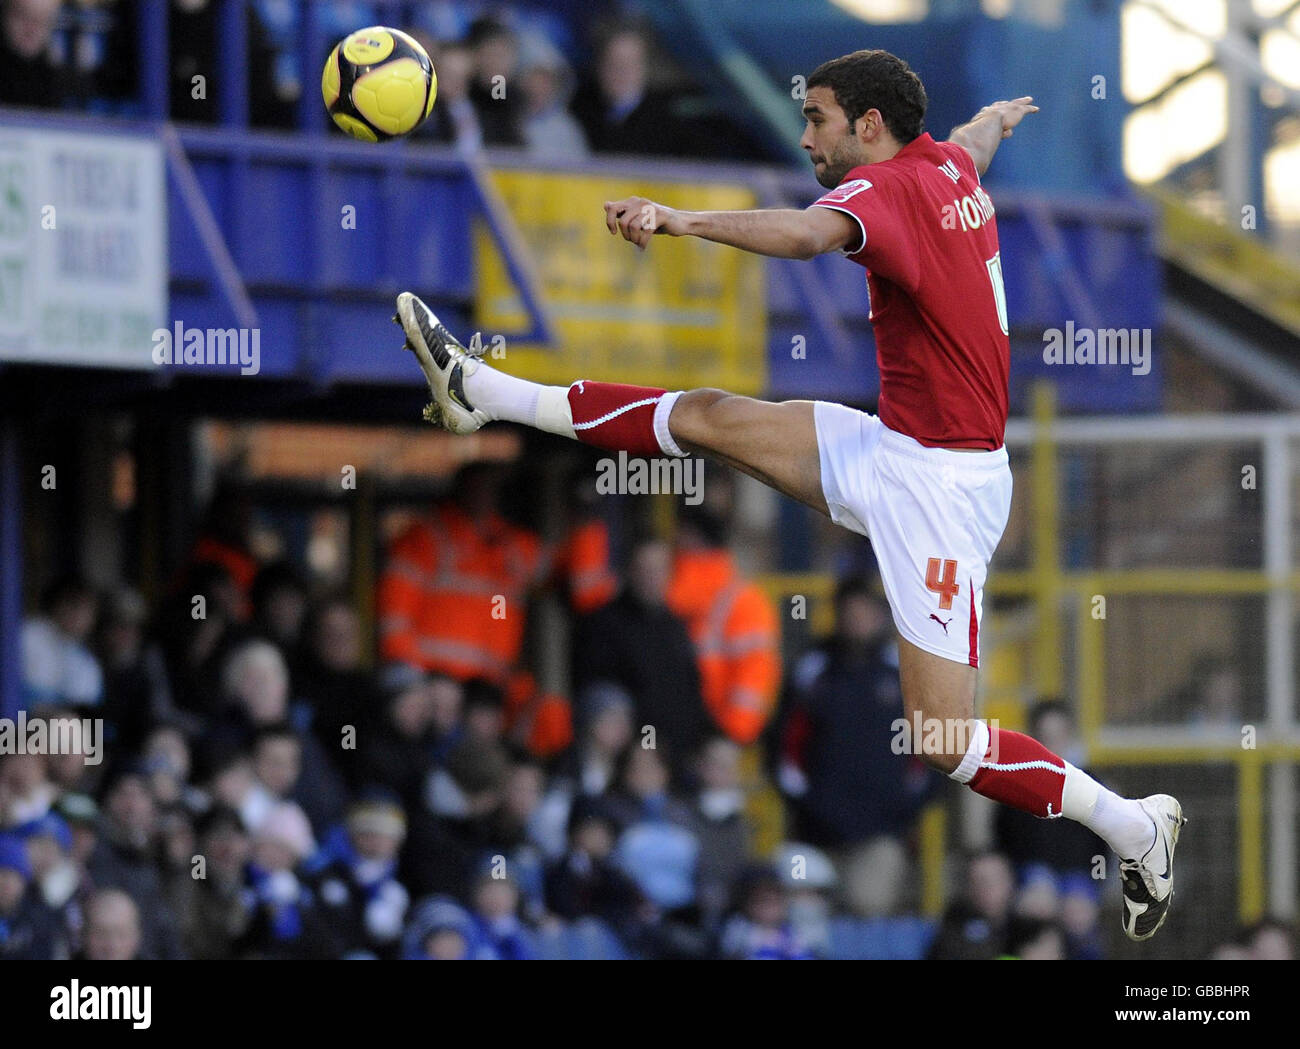 Bristol City's Liam Fontaine rises high to control the ball during the FA Cup Third Round match at Fratton Park, Portsmouth. Stock Photo